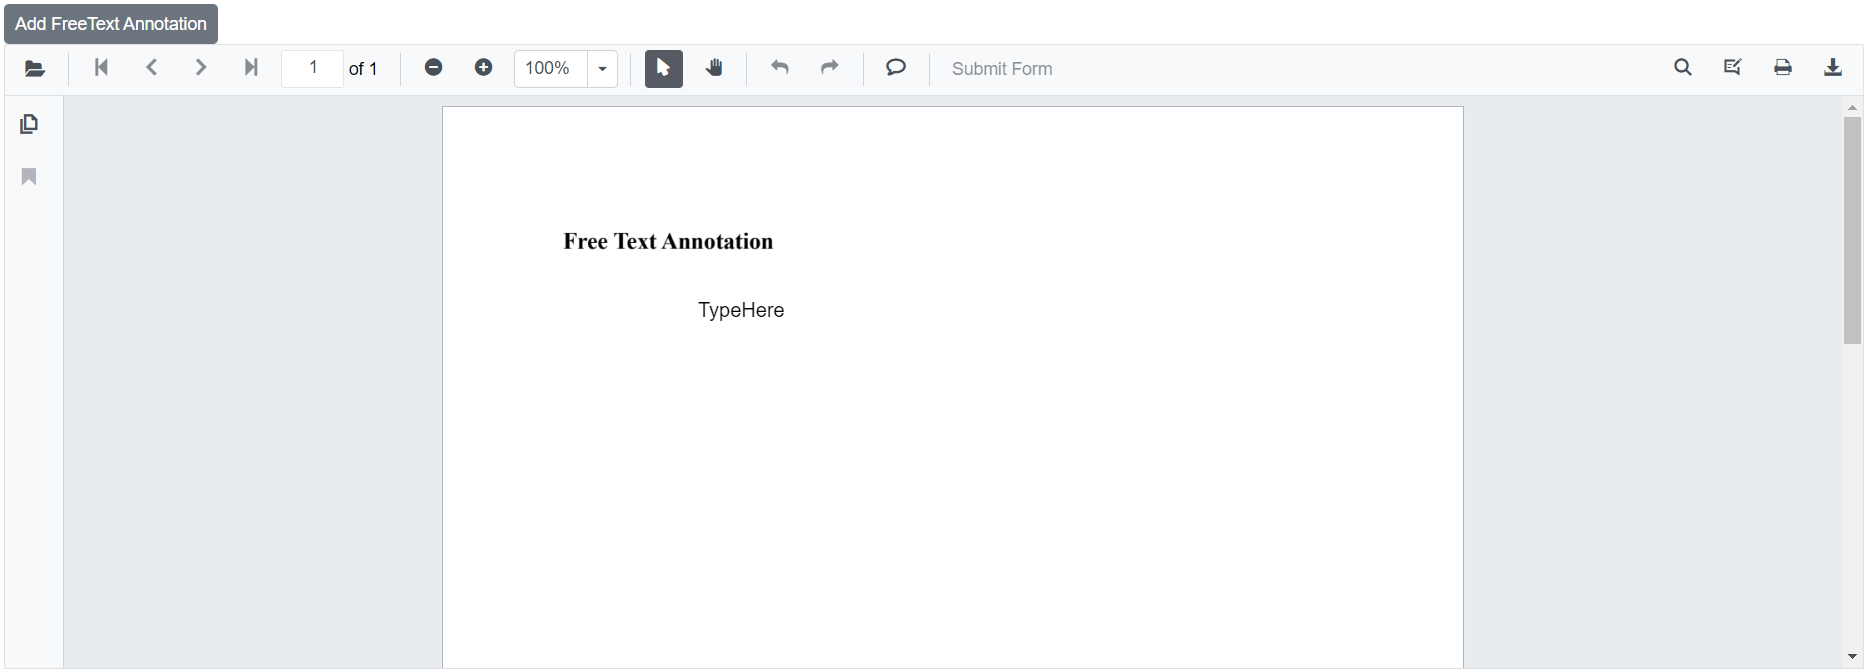 Programmatically Added Free Text Annotation in Blazor SfPdfViewer